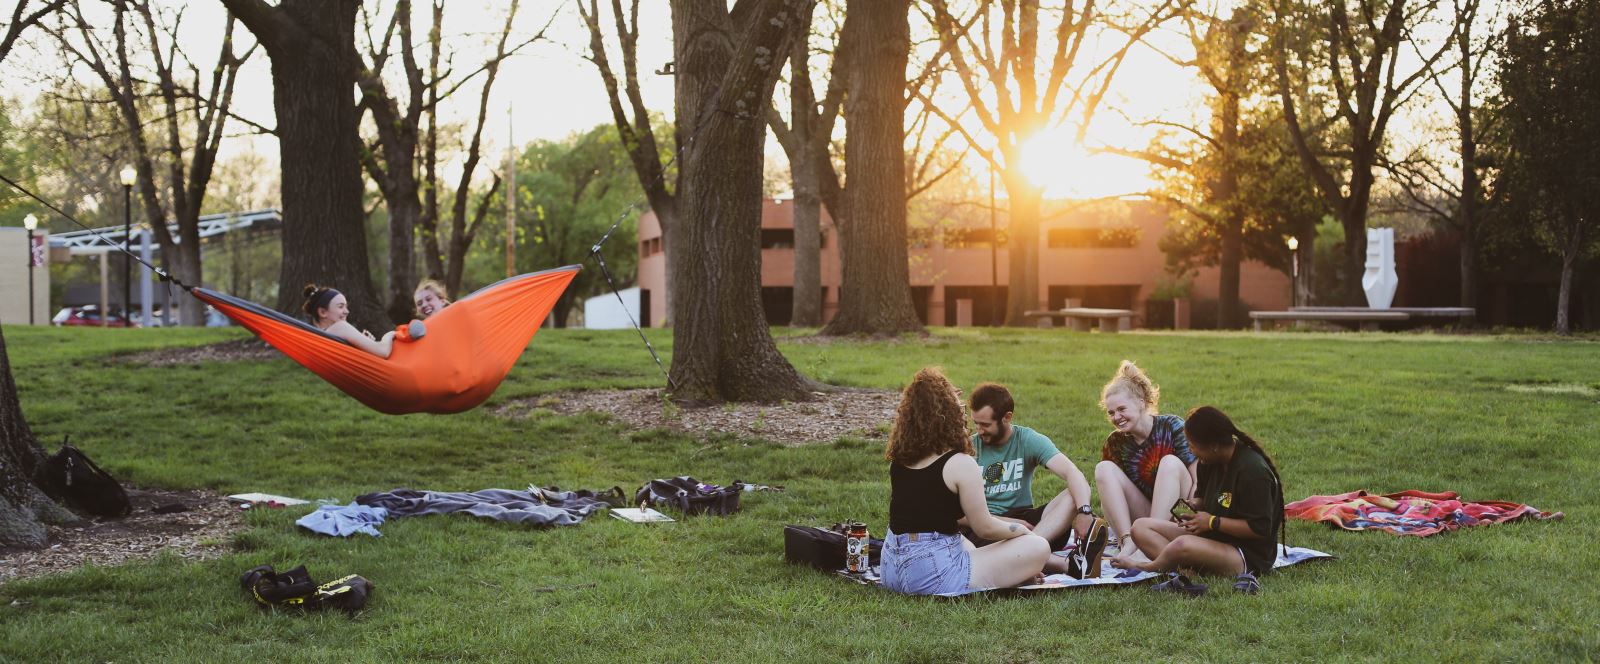 Group of students on the green in a hammock and on a picnic blanket with the sun setting in the background